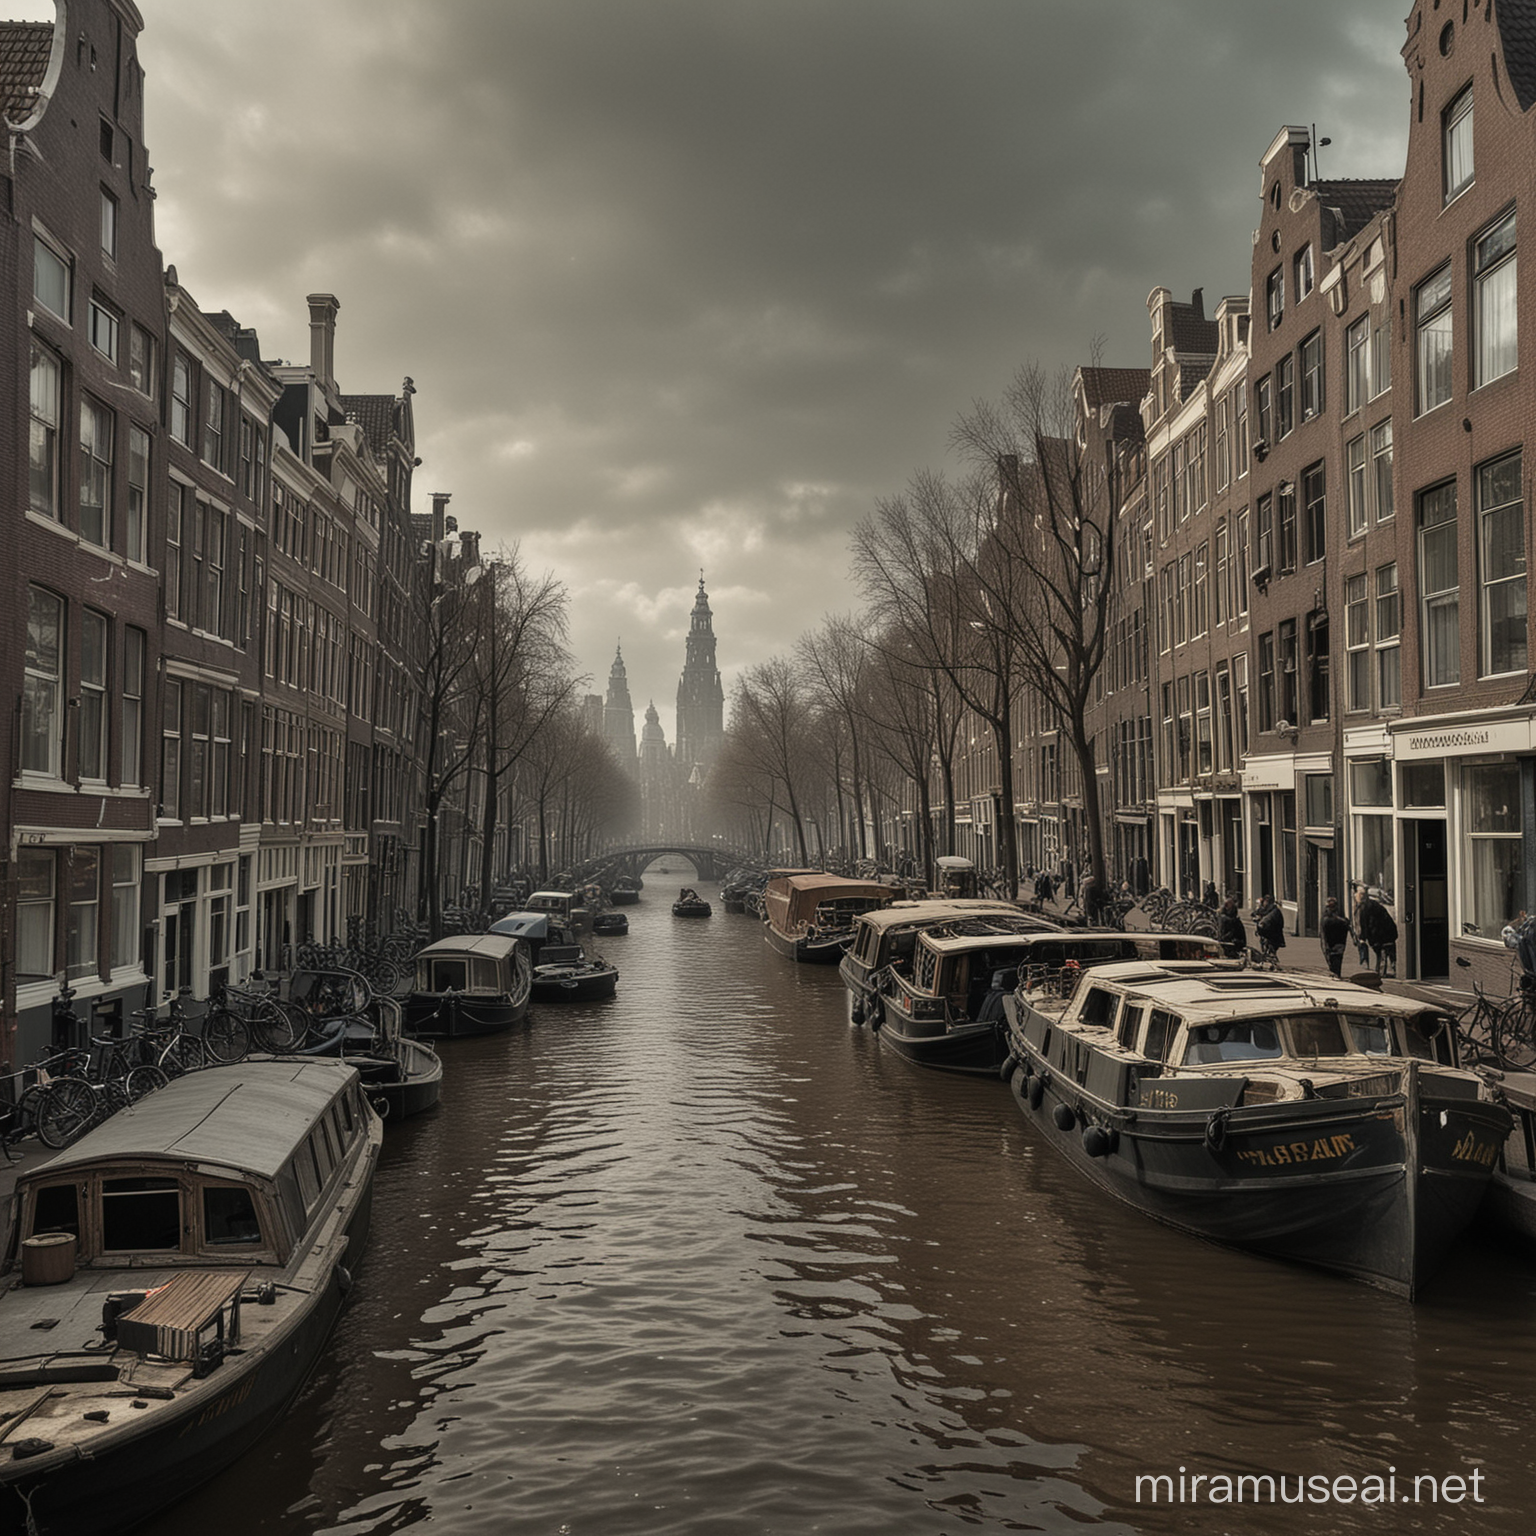 Apocalyptic Amsterdam Cityscape with Ruined Buildings and Ominous Sky